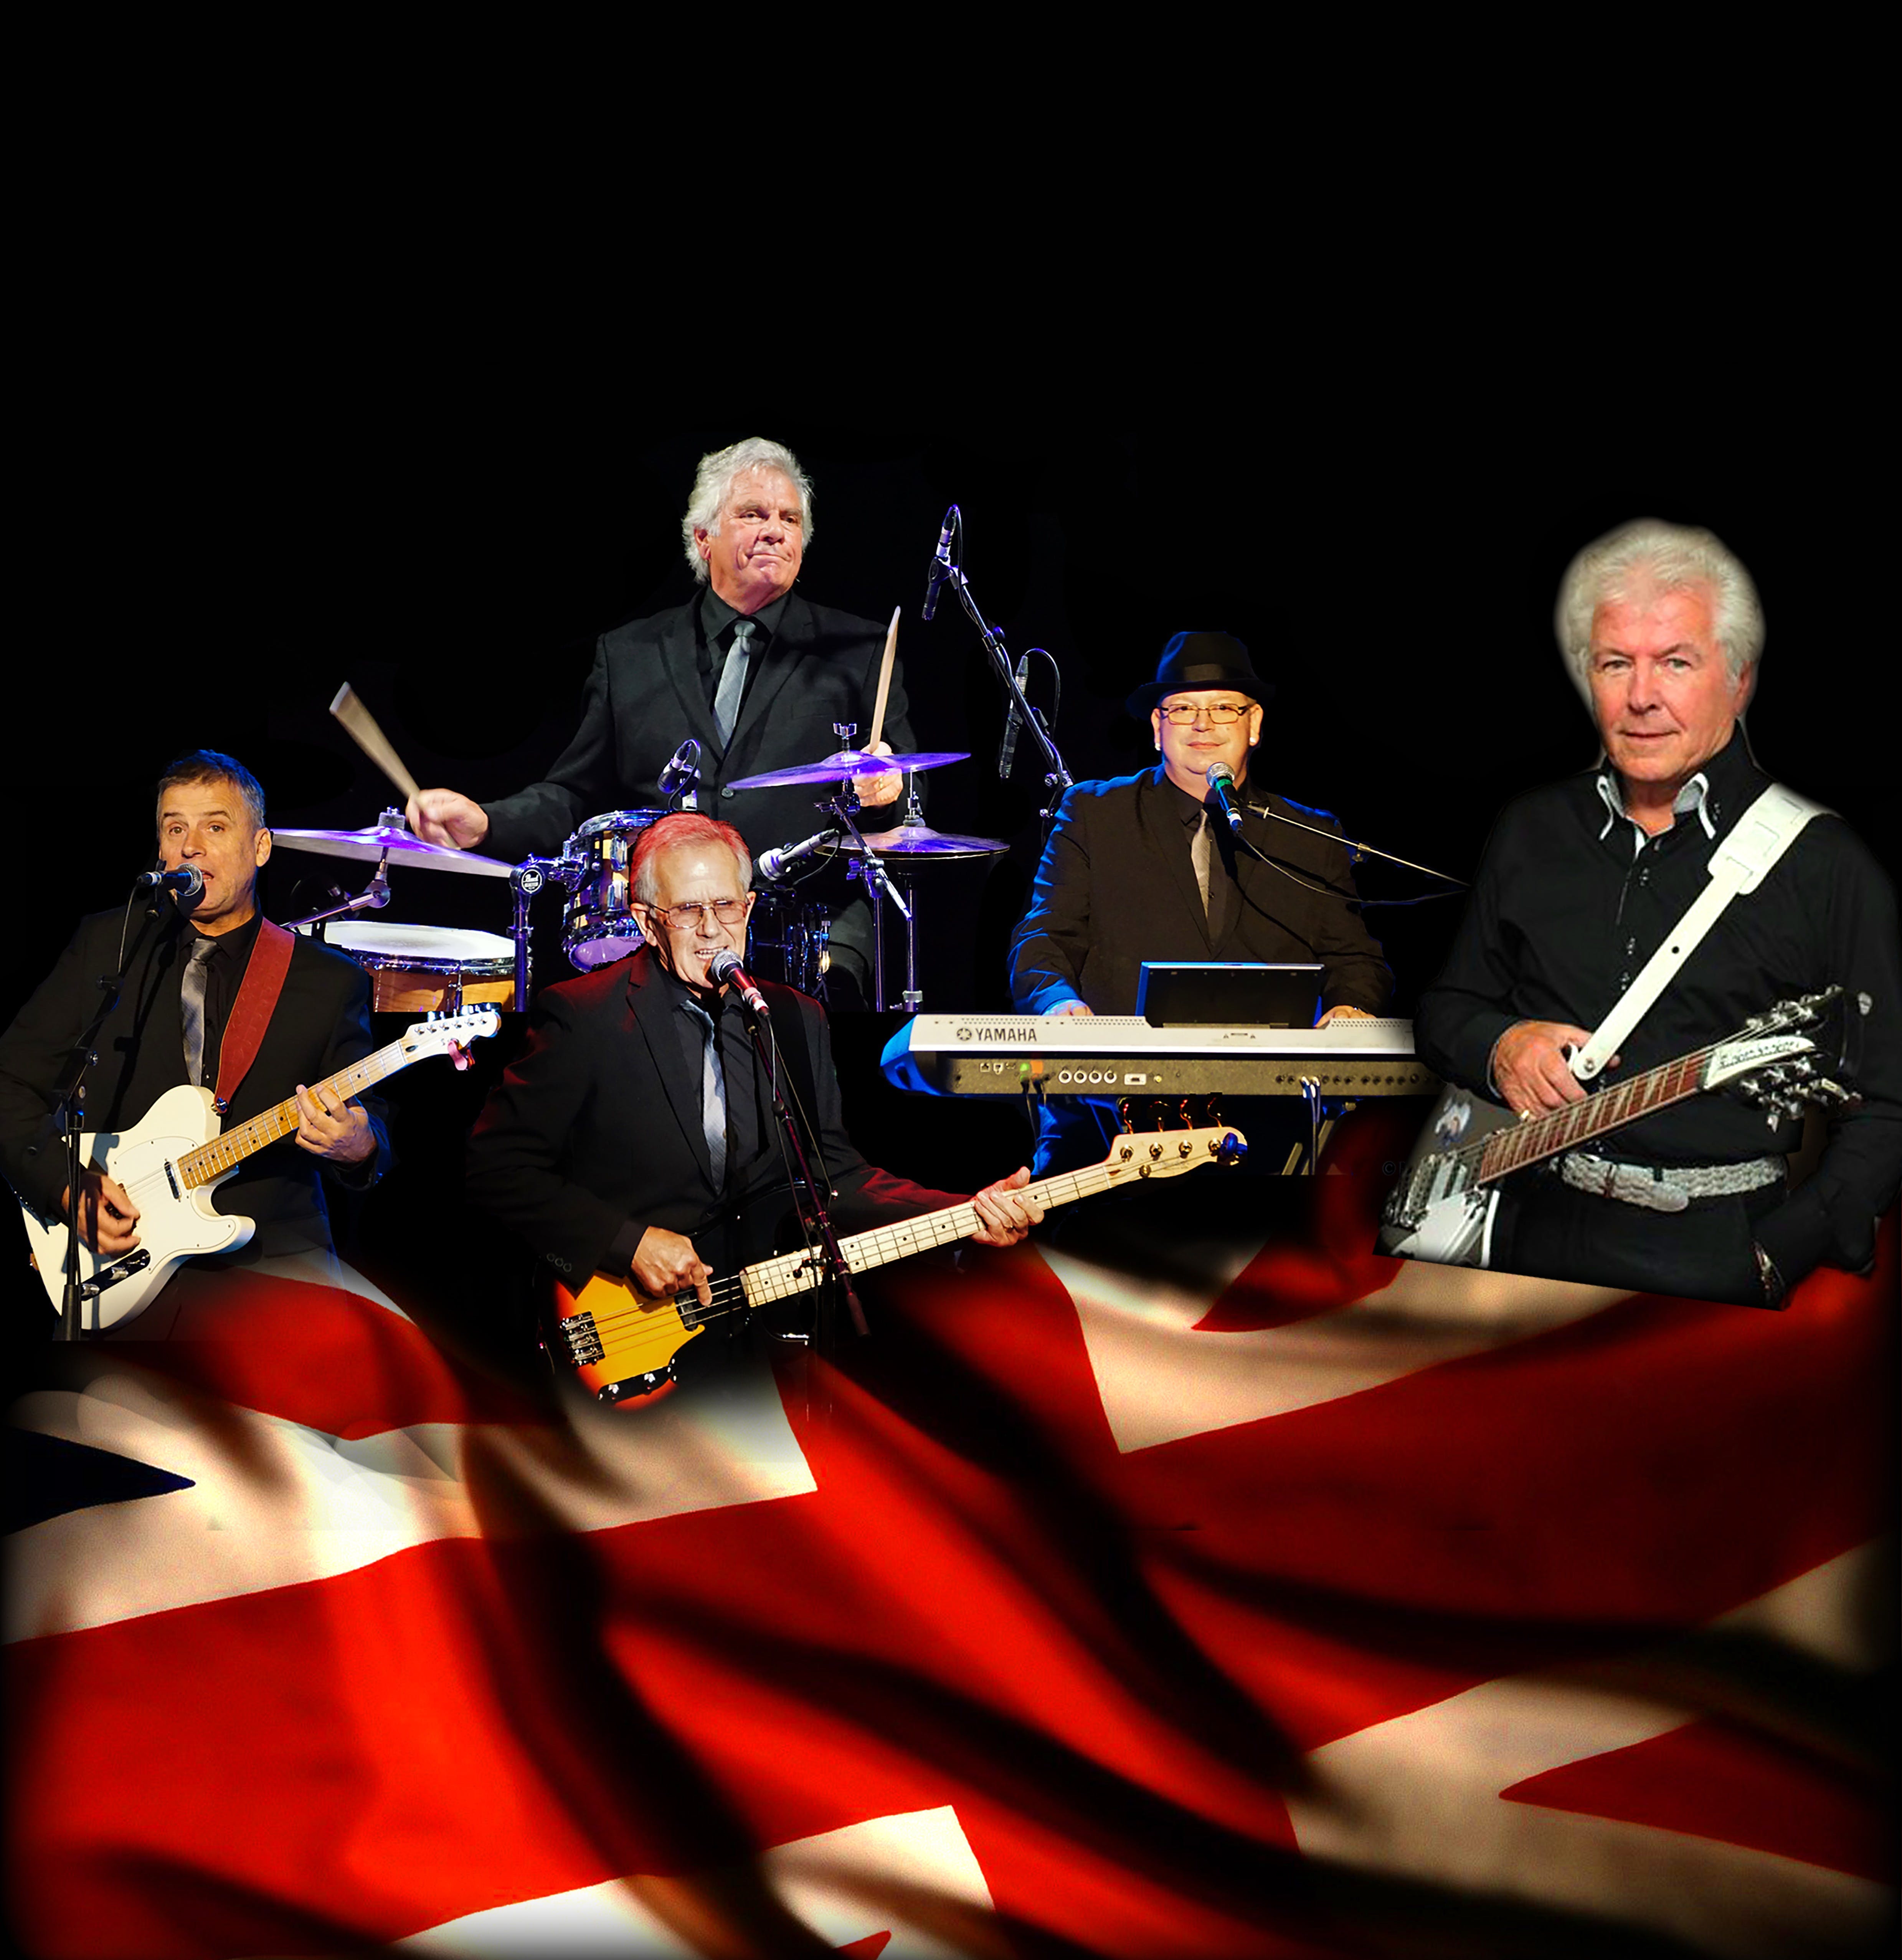 Herman's Hermits with Special Guest Mike Pender - The Six O'Clock Hop - St Kilda Accommodation